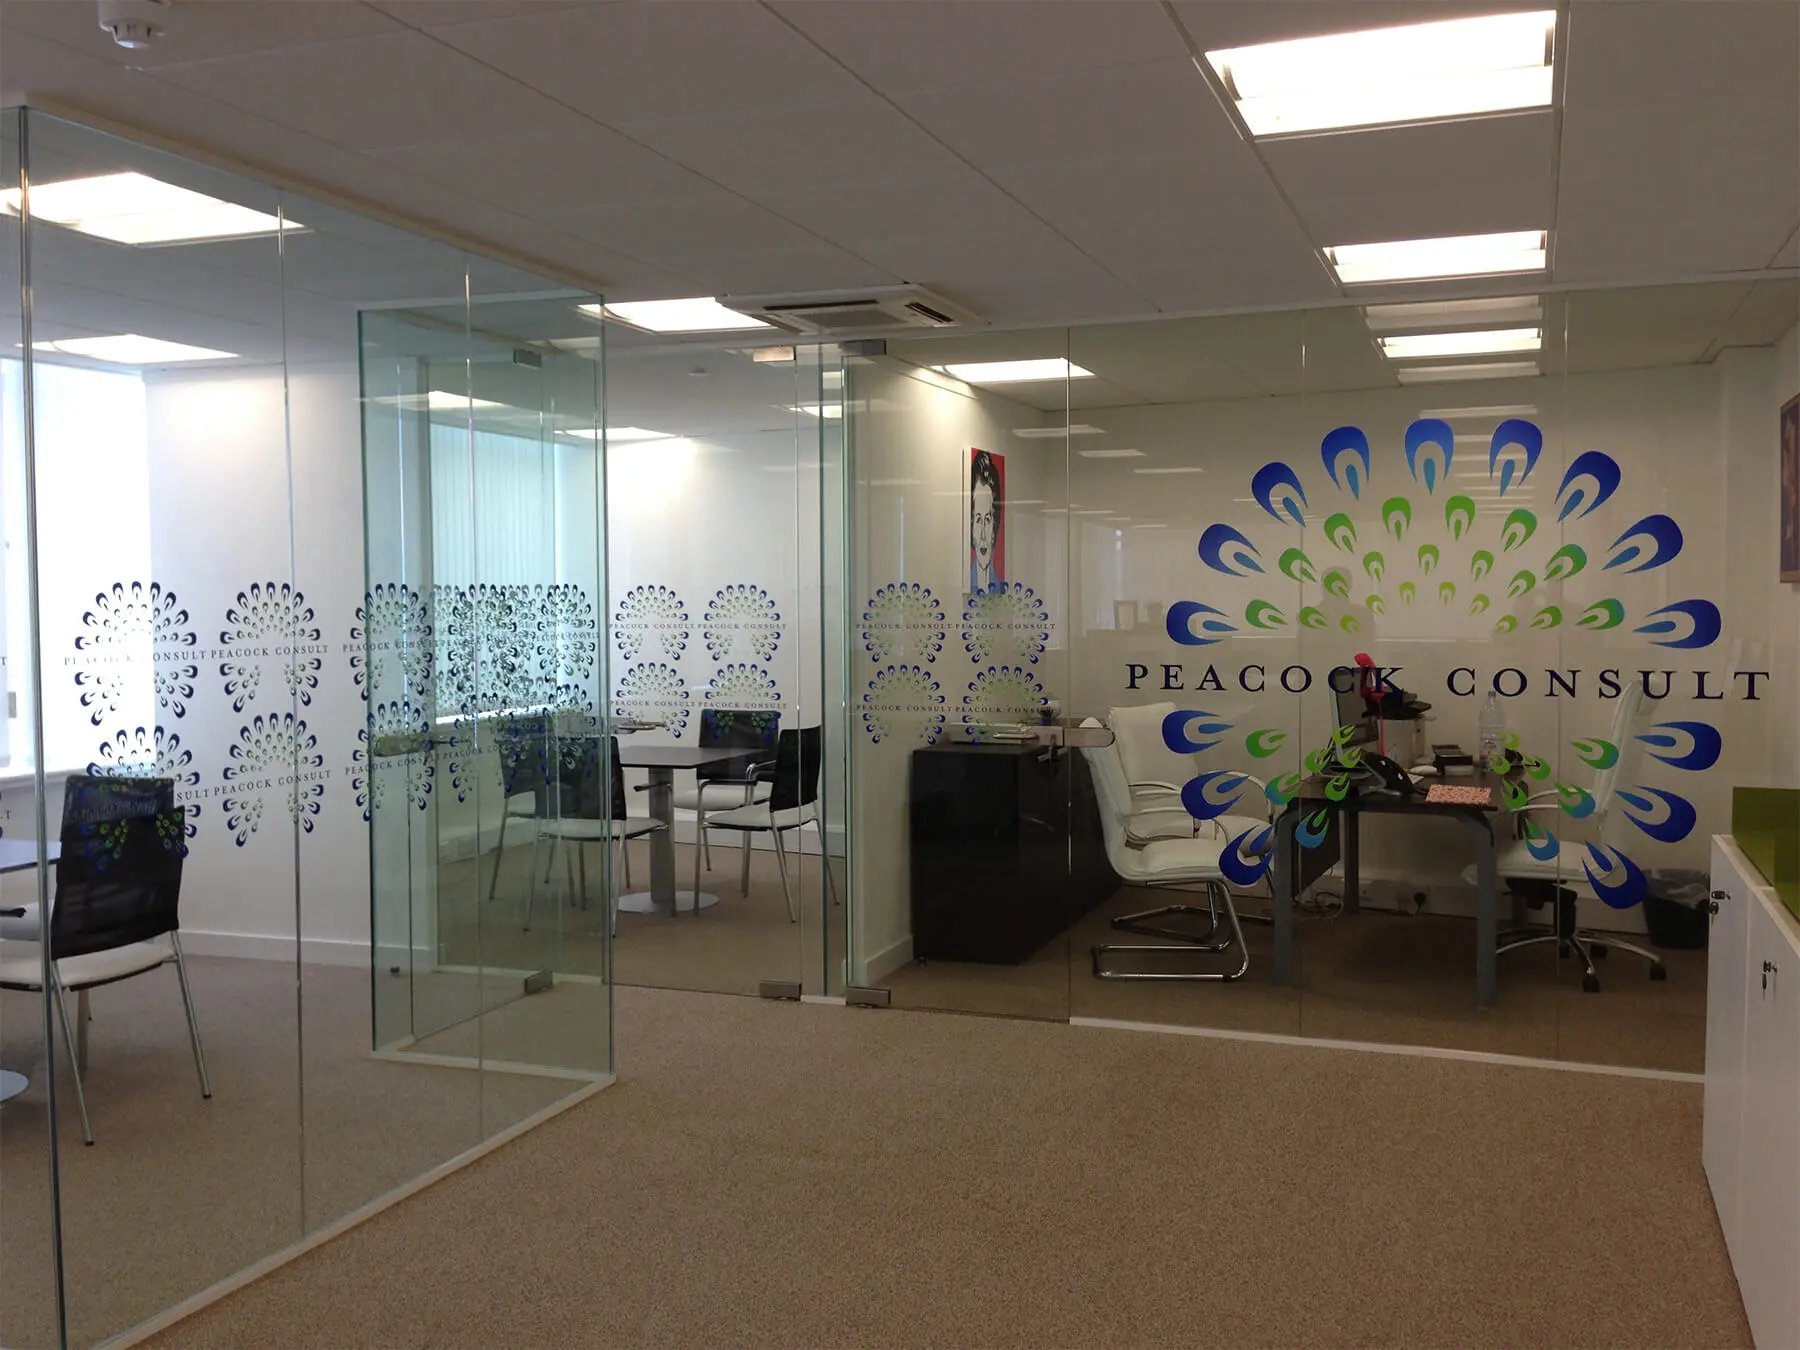 Single glazed frameless glass doors with logo cut out on it